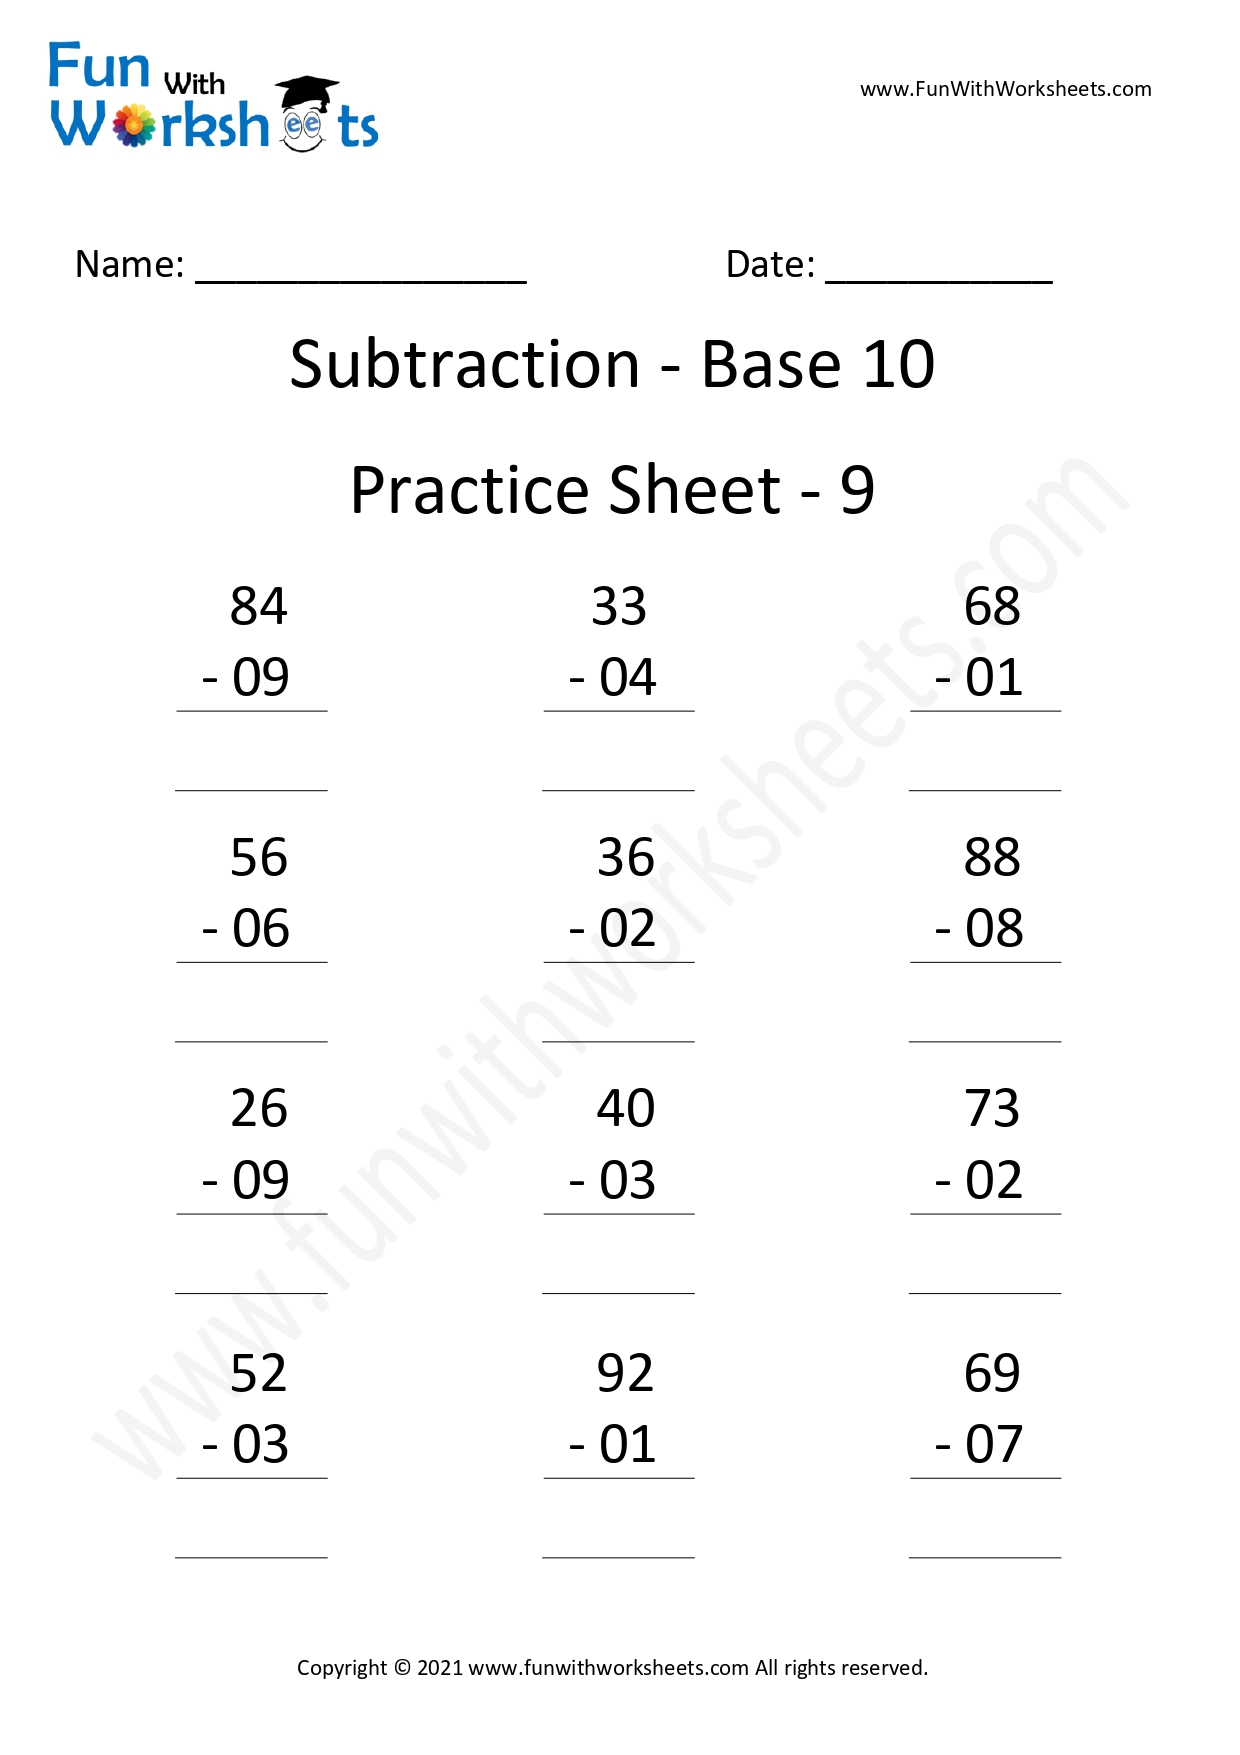 free printable worksheets vedic subtraction base 10 practice sheets archives fun with worksheets - vedic maths worksheet 1 worksheet